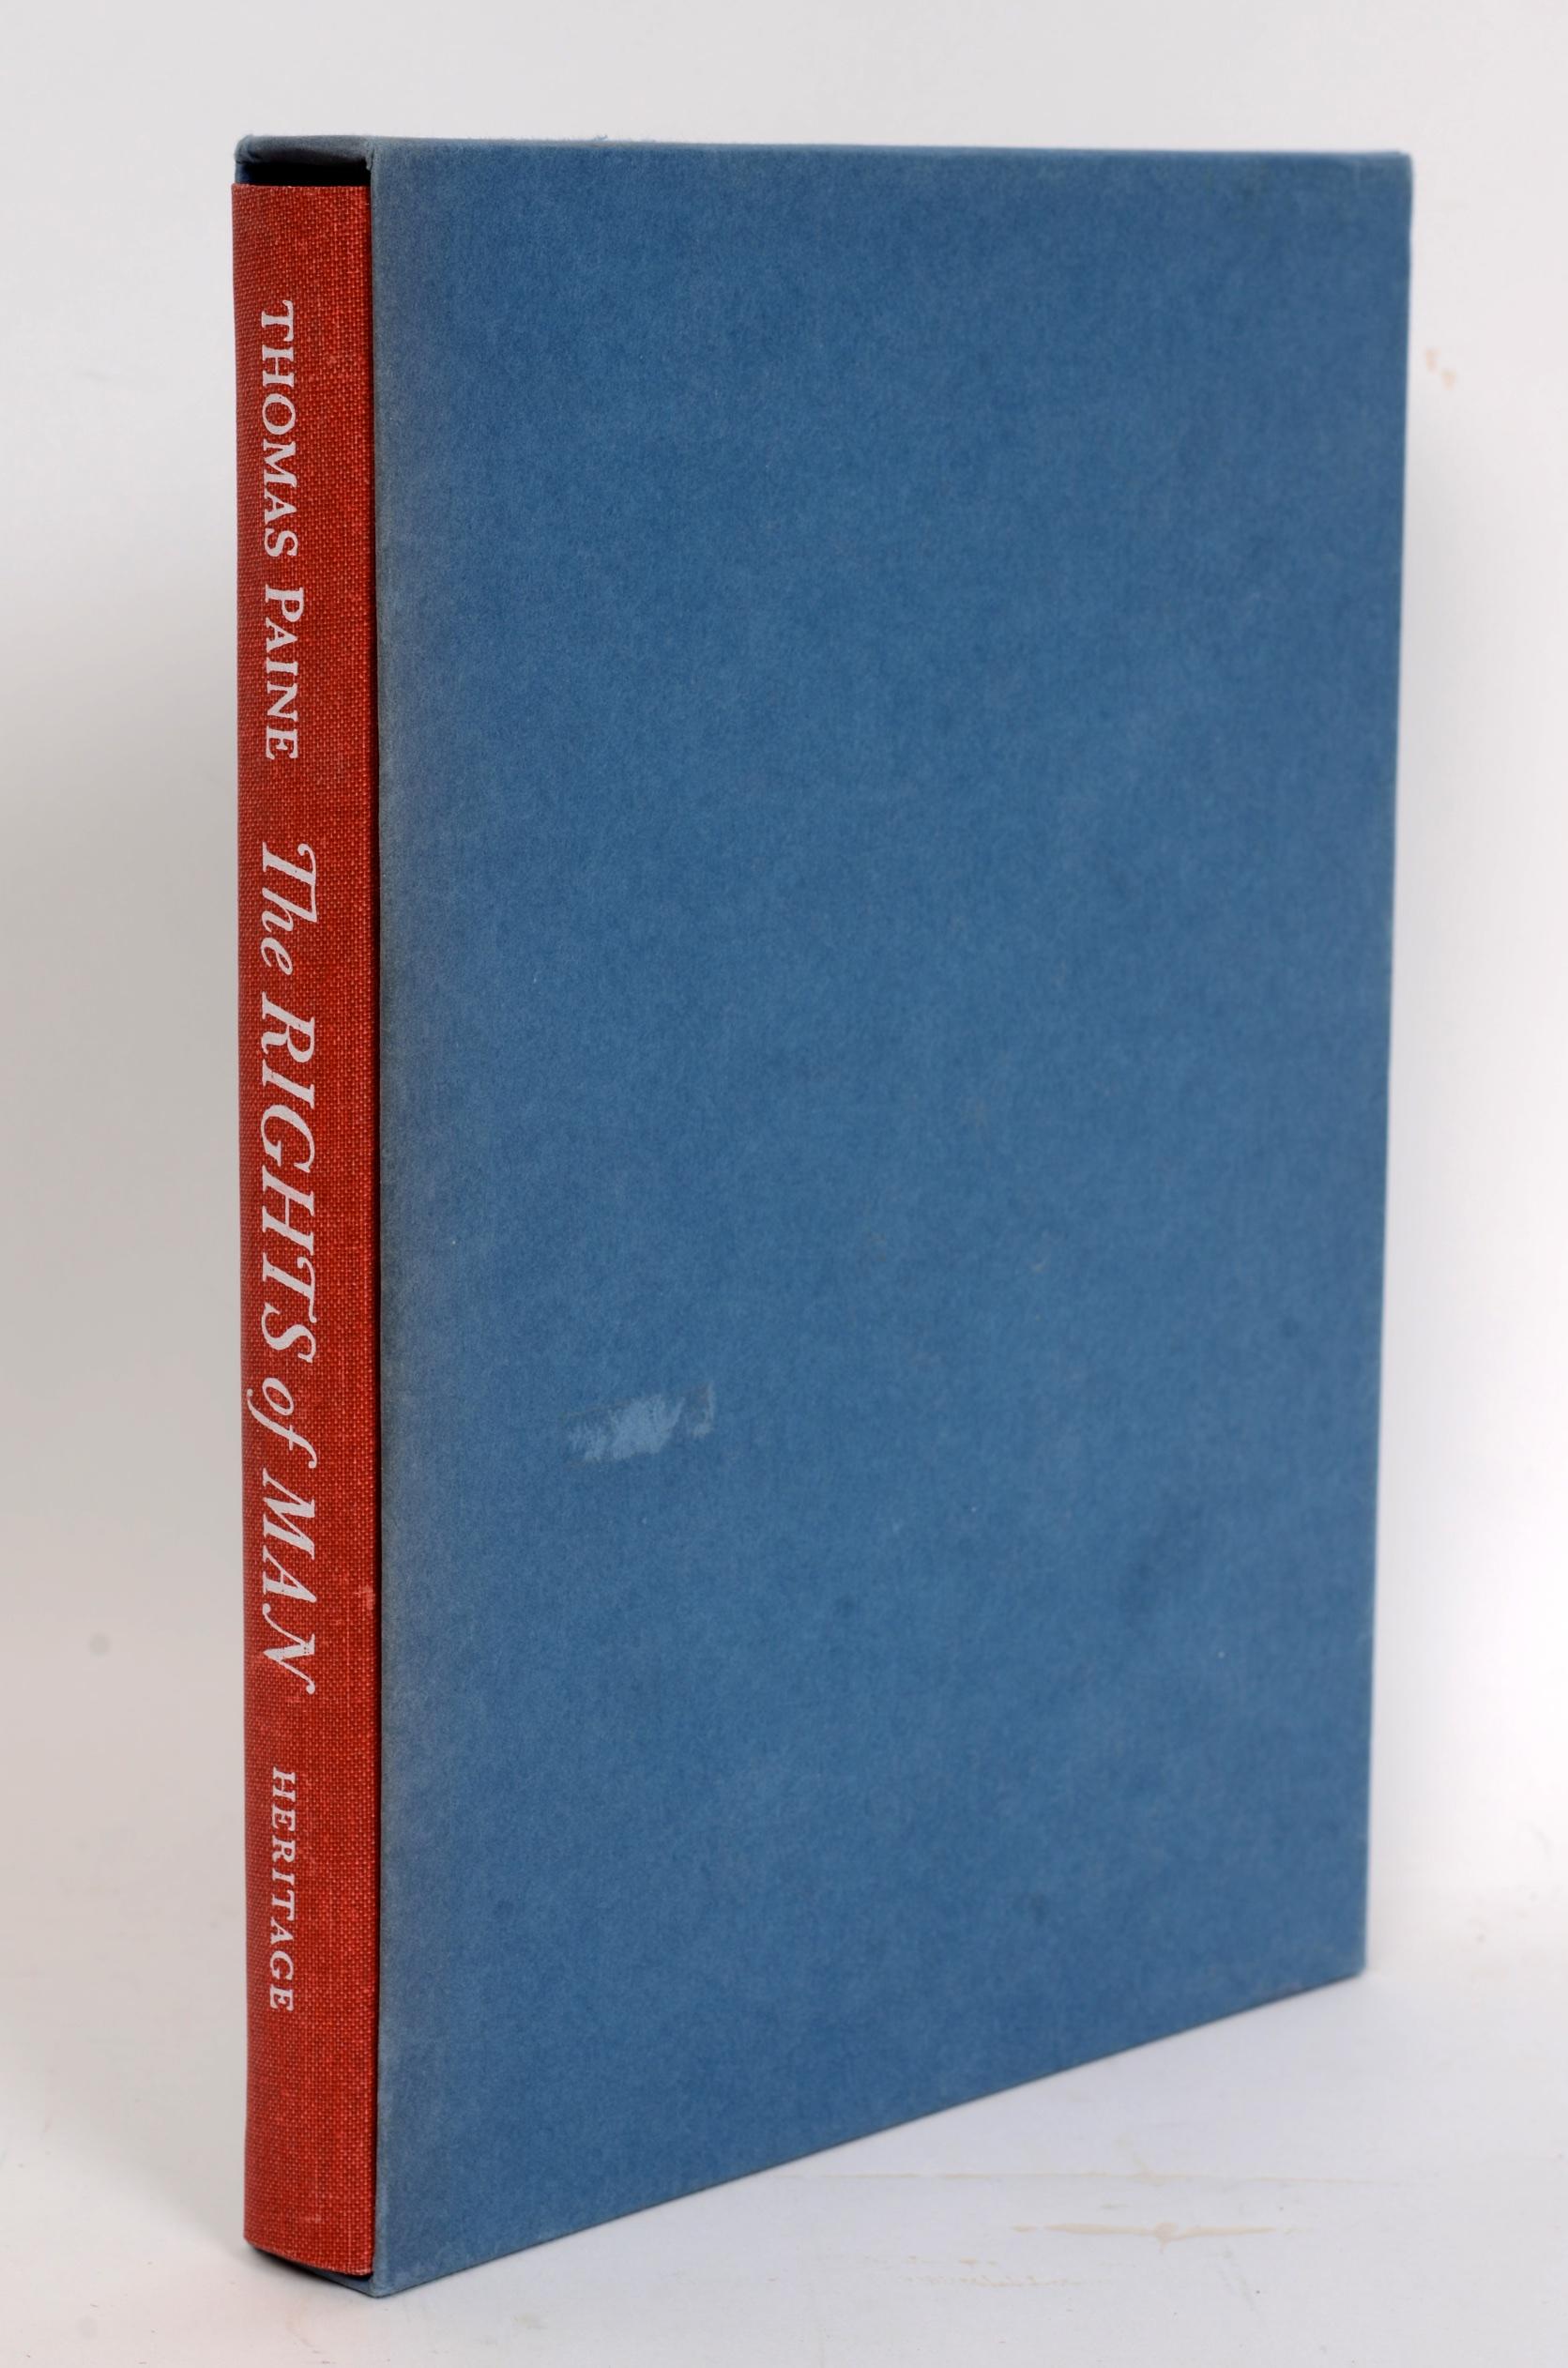 The Rights of Man by Thomas Paine. Heritage Press, Norwalk, 1961. First Edition thus hardcover with slipcase and original paperwork. It is a book by Thomas Paine, made up of 31 articles arguing that popular political revolution is permissible when a